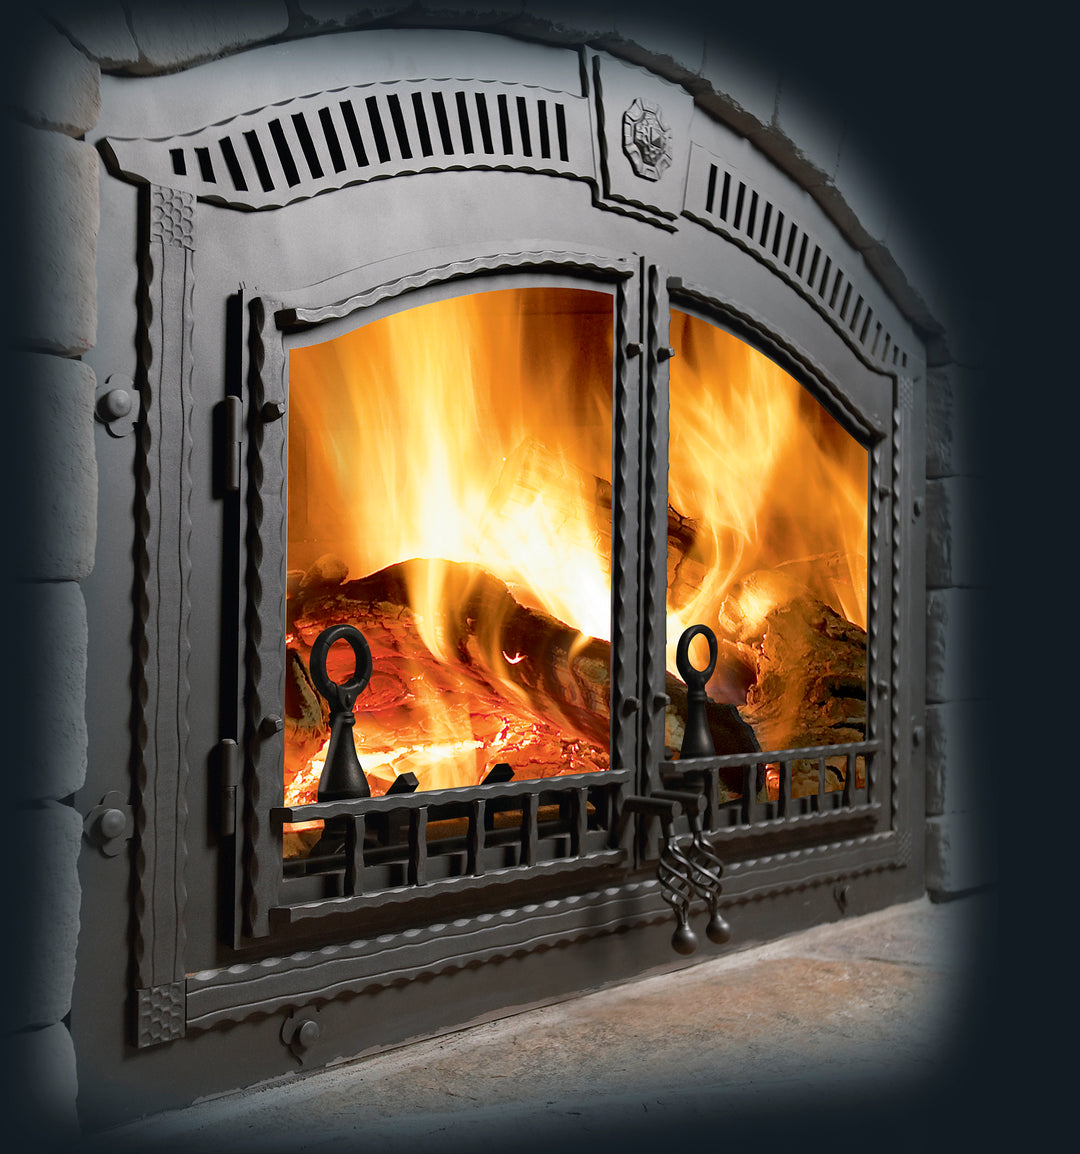 High Country™ 6000 Wood Fireplace